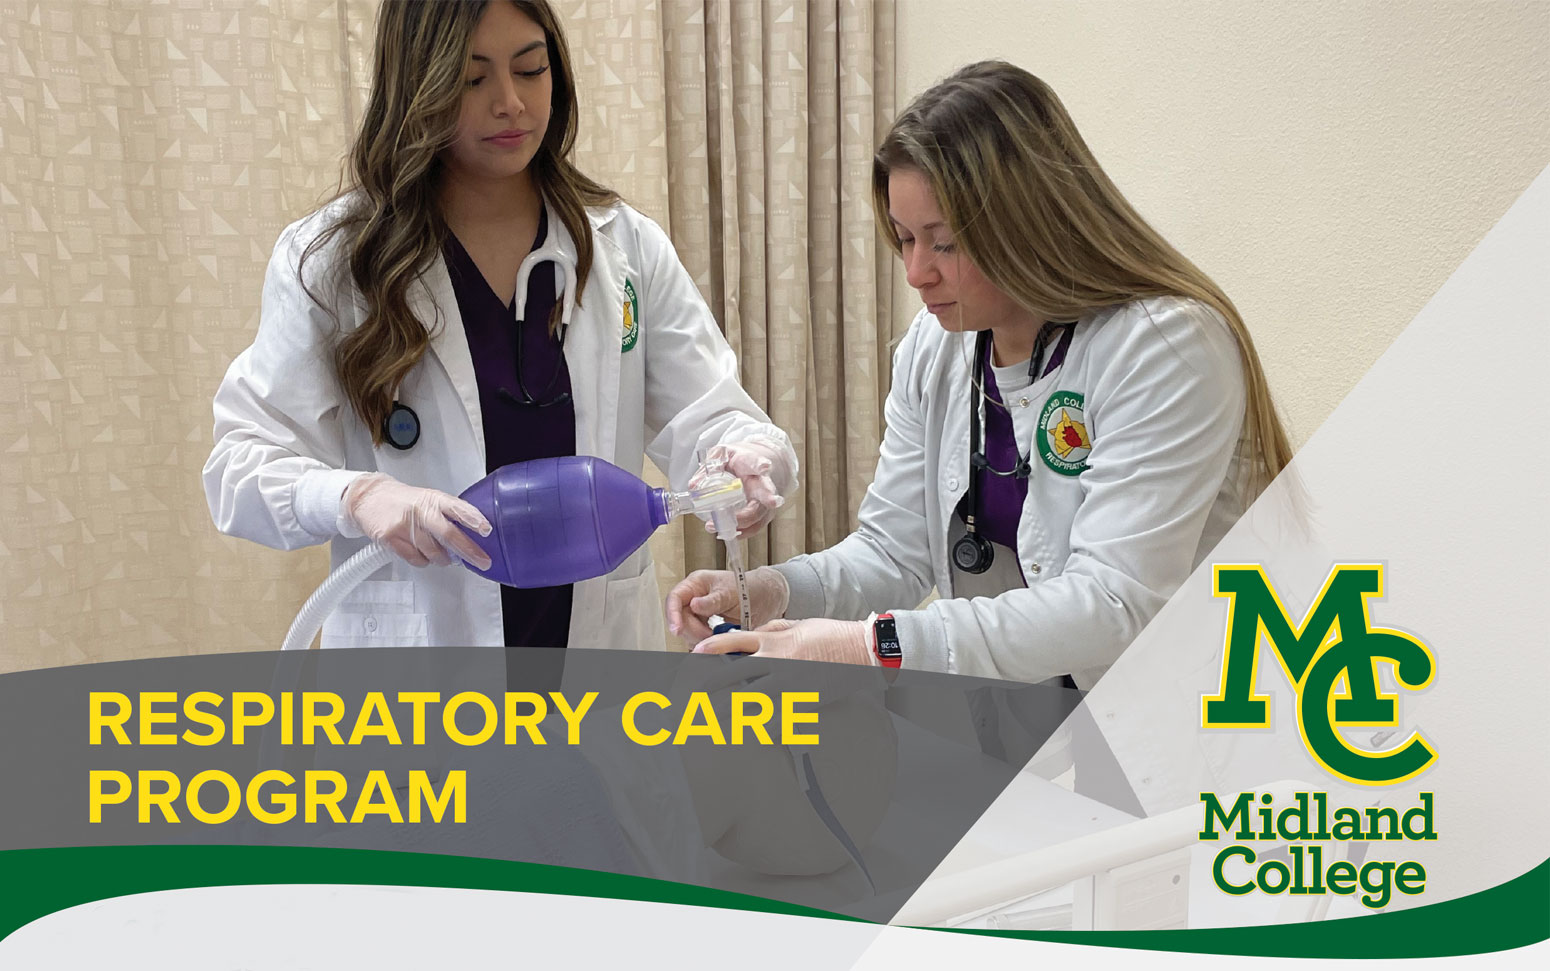 MC students administering patient care